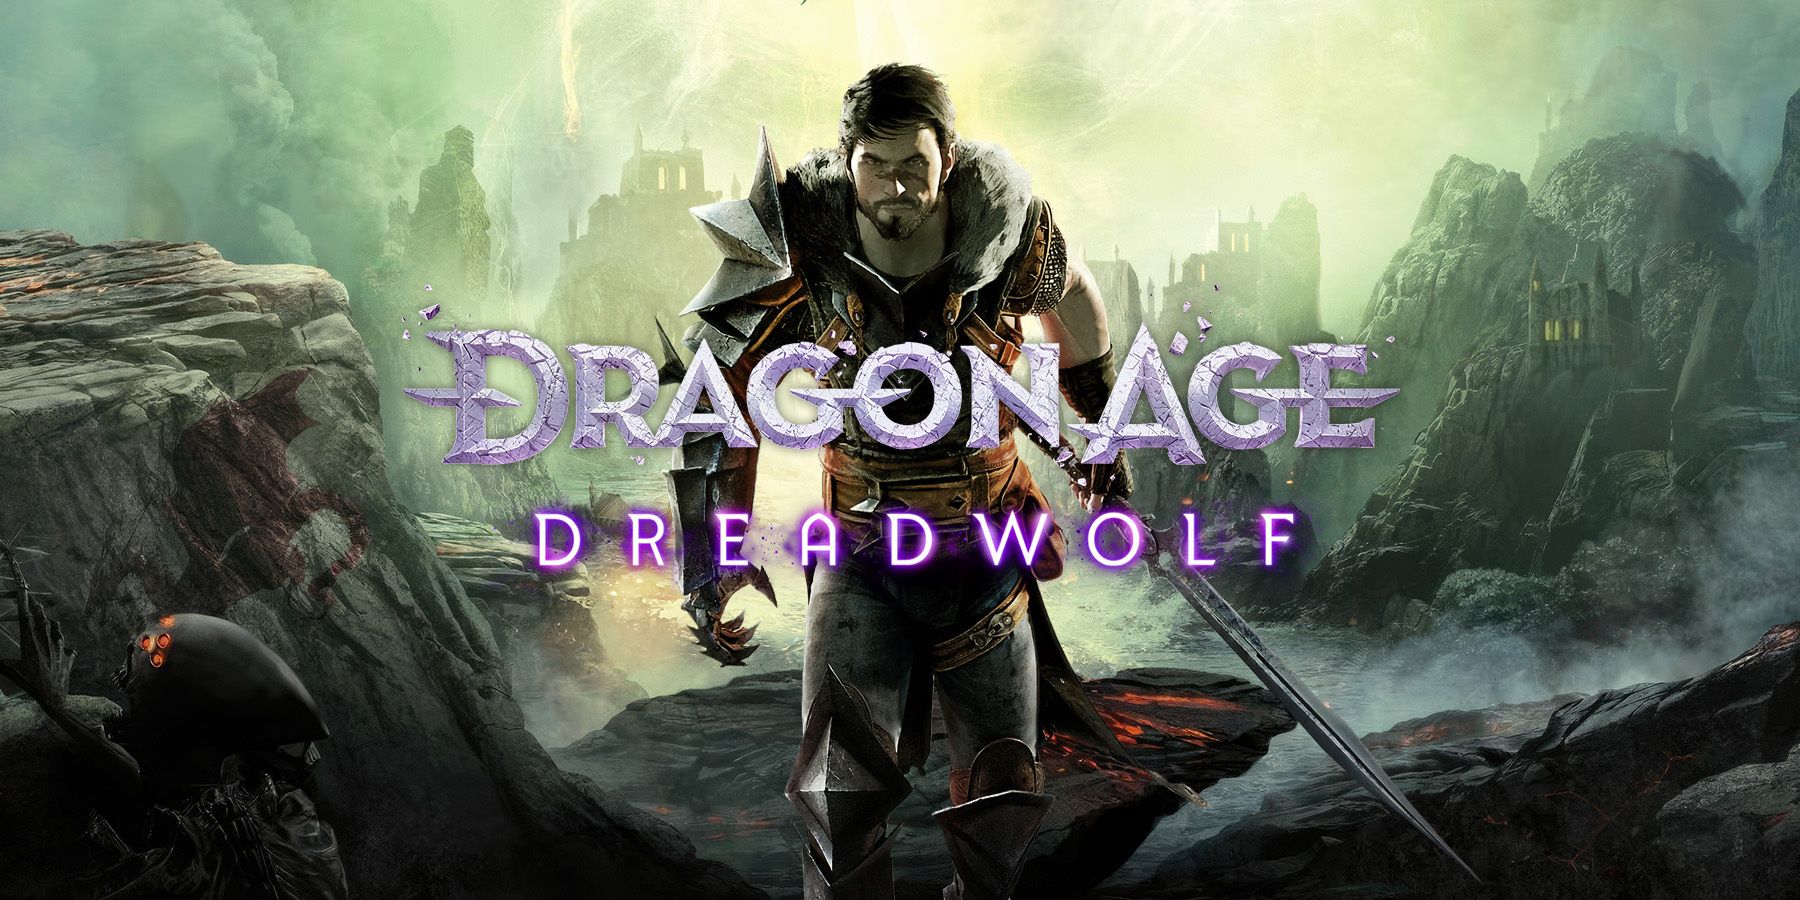 dragon age: dreadwolf's rumored combat shift may signal a coming break in bioware tradition